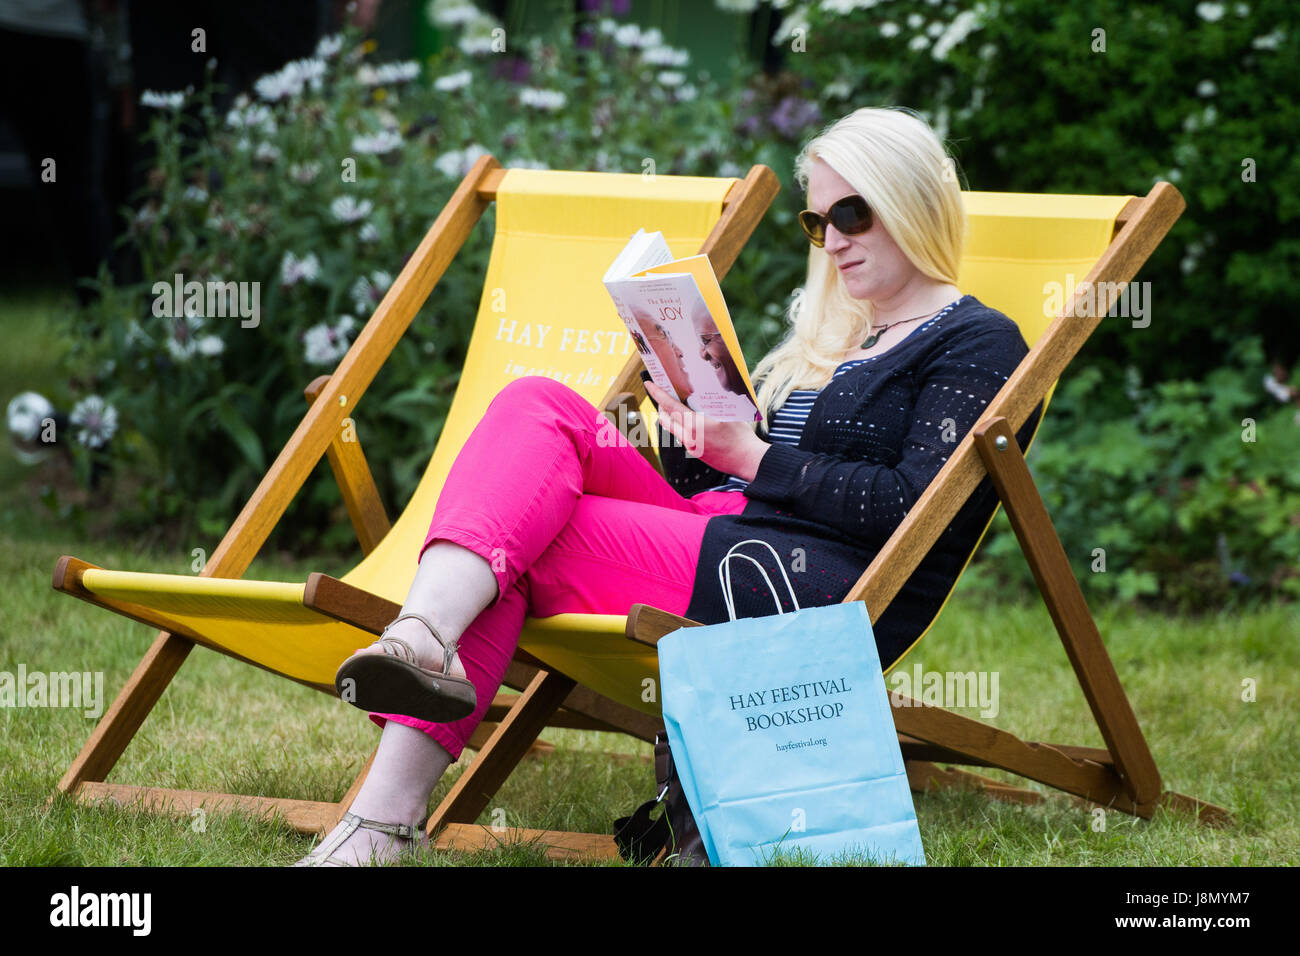 Hay Festival, Wales UK, Monday 29 May 2017 A woman reading and relaxing in the colourful deck-chairs on the lawn on a warm and muggy Bank Holiday Monday afternoon at the Hay Literature Festival 2017 Now in its 30th year, the festival draws tens of thousand of visitors a day to what was described by former US president Bill Clinton as "the woodstock of the mind" Photo credit Credit: keith morris/Alamy Live News Stock Photo